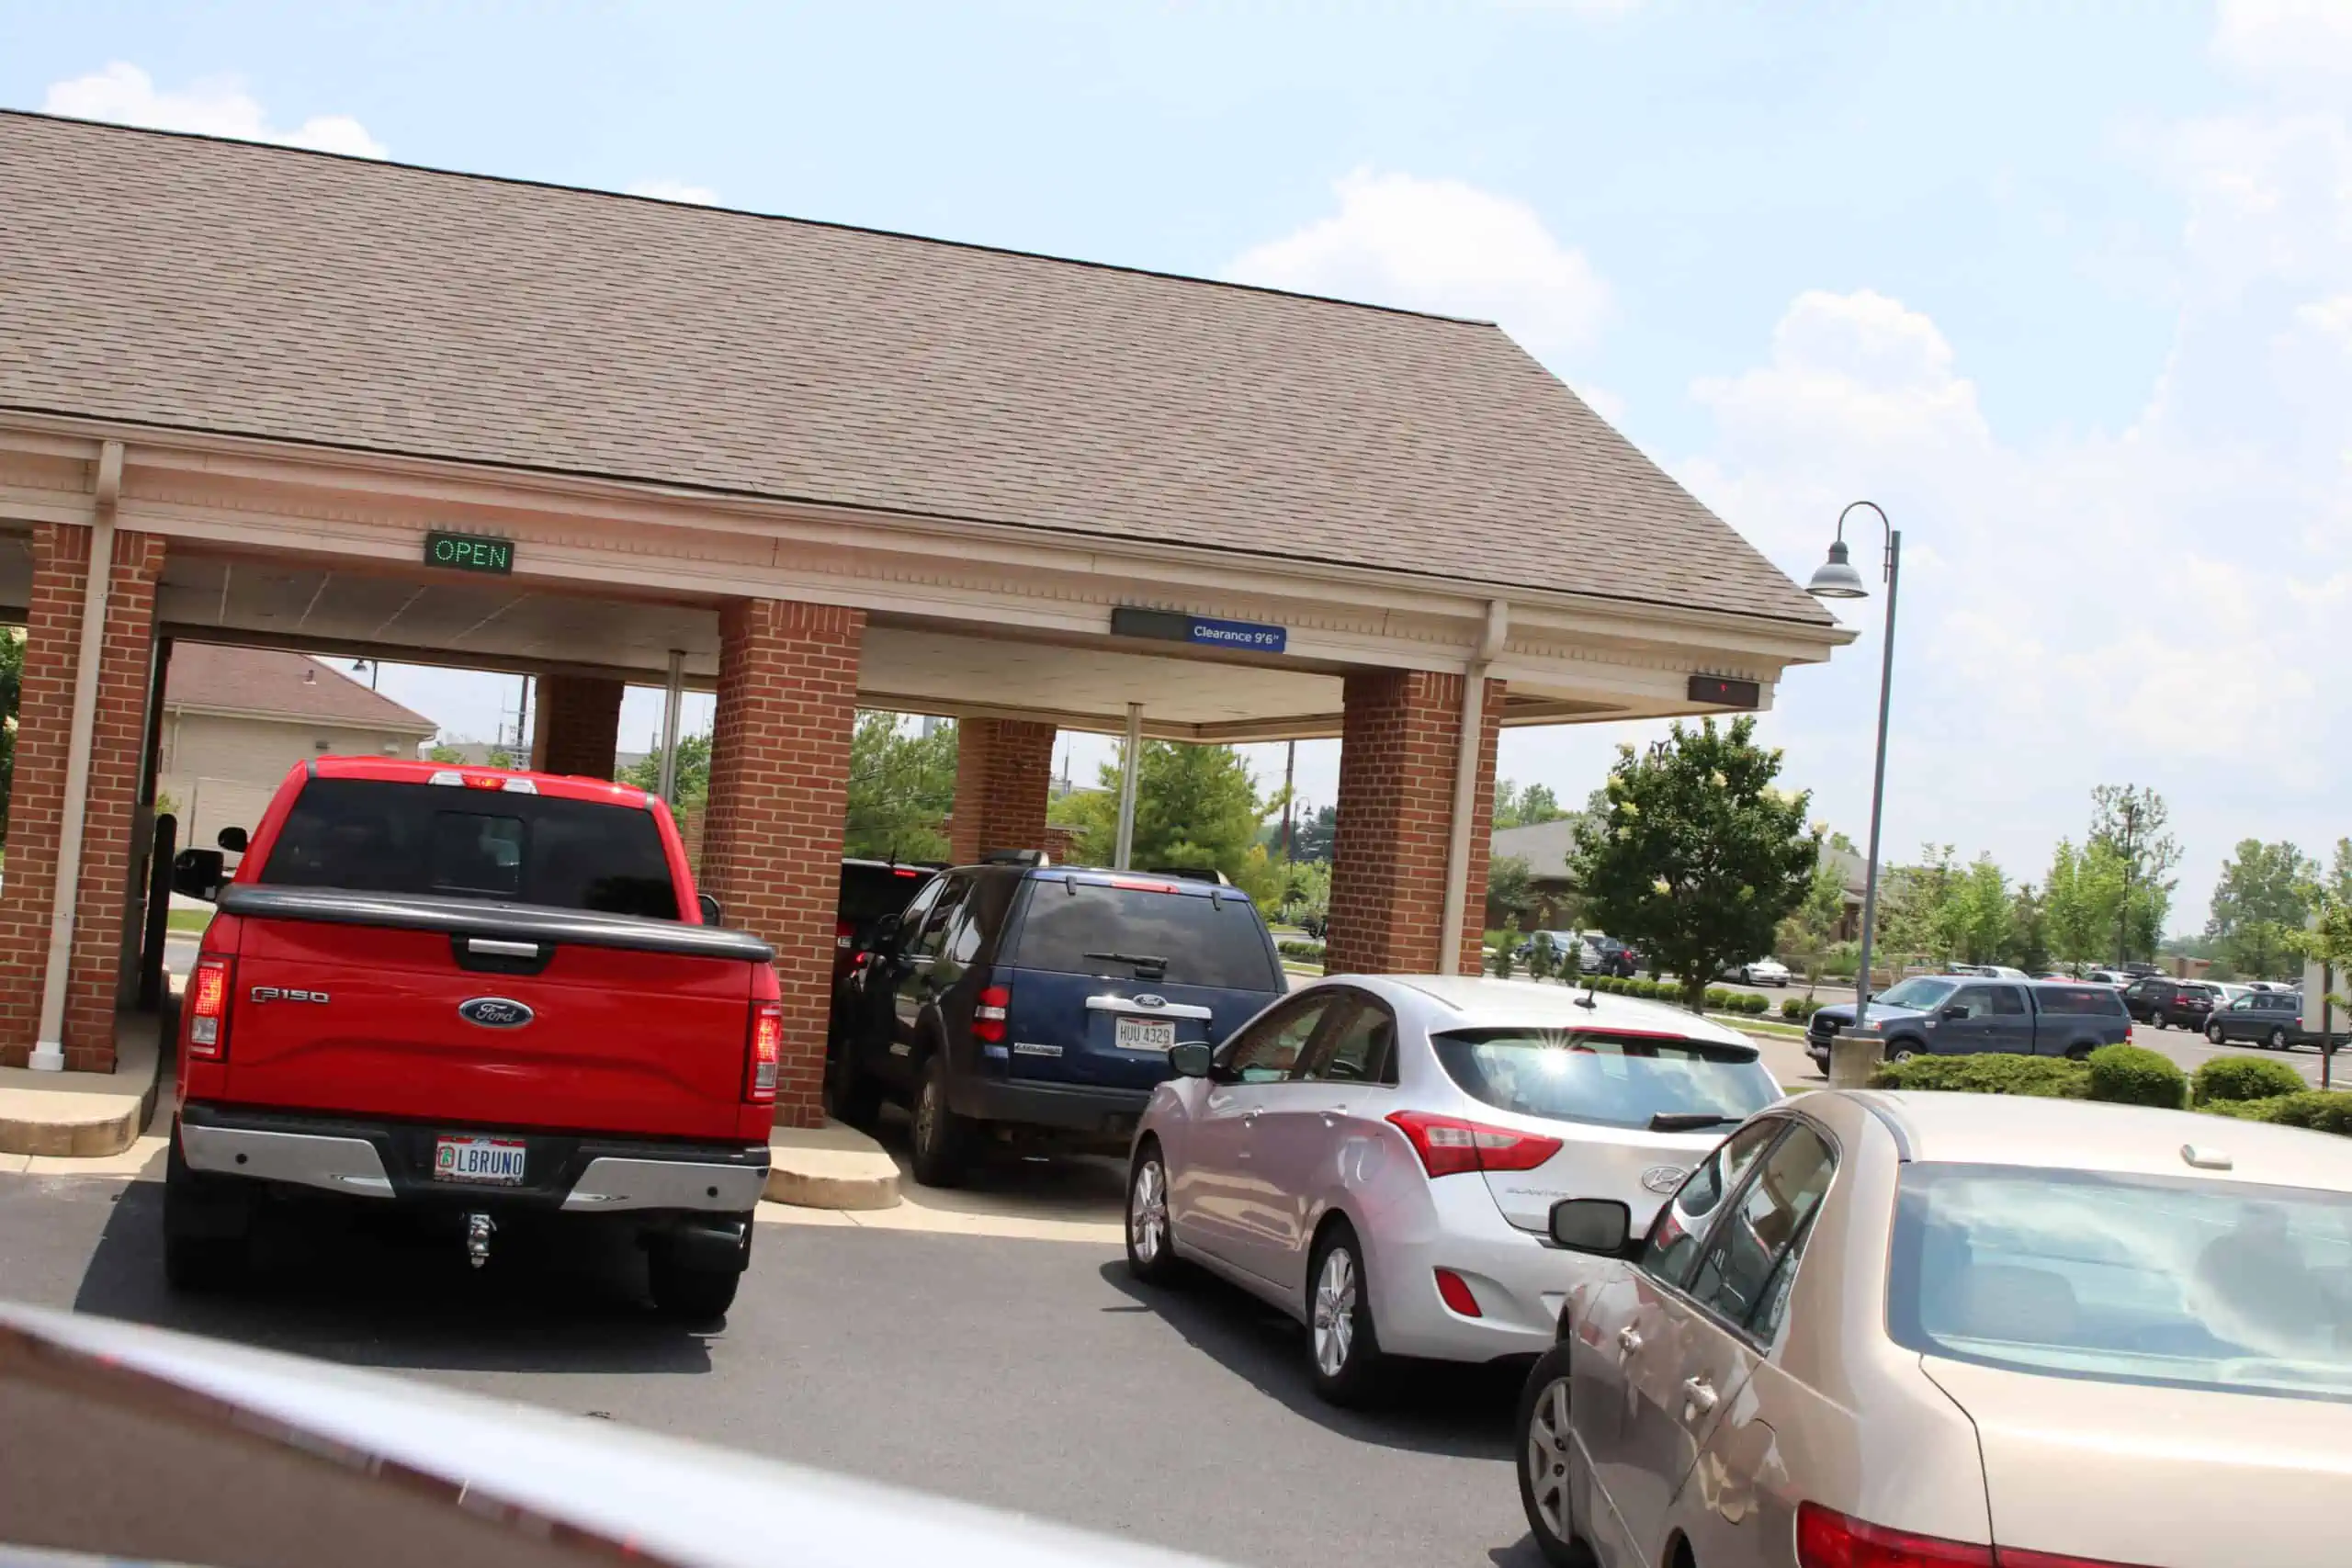 Switching banks to one with a drive-thru with cars lined up